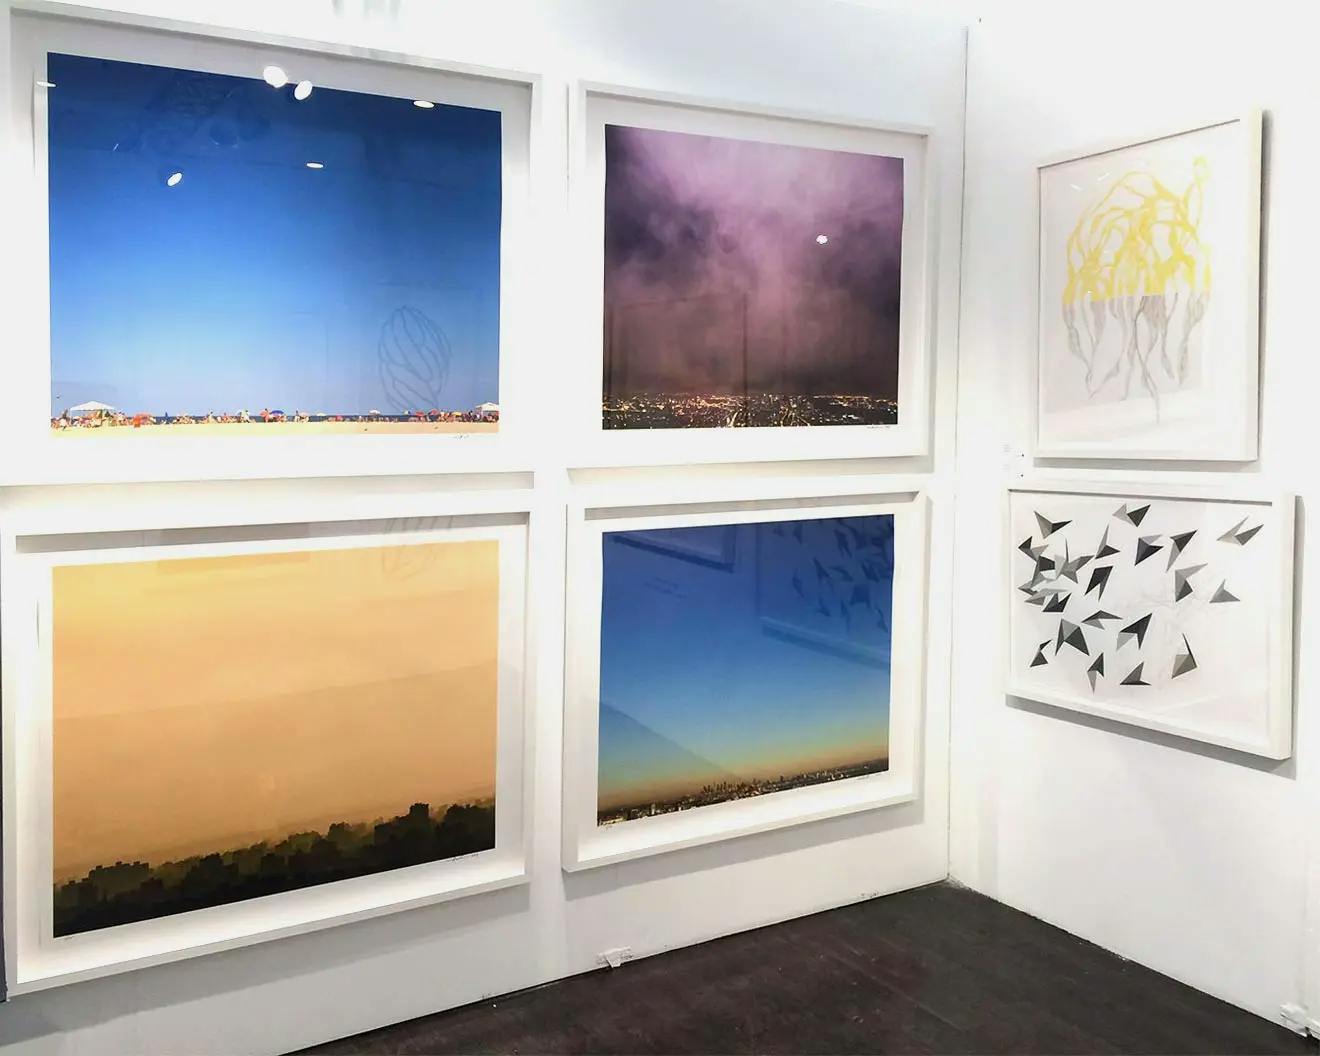 Exhibition: Affordable Art Fair: Gallery